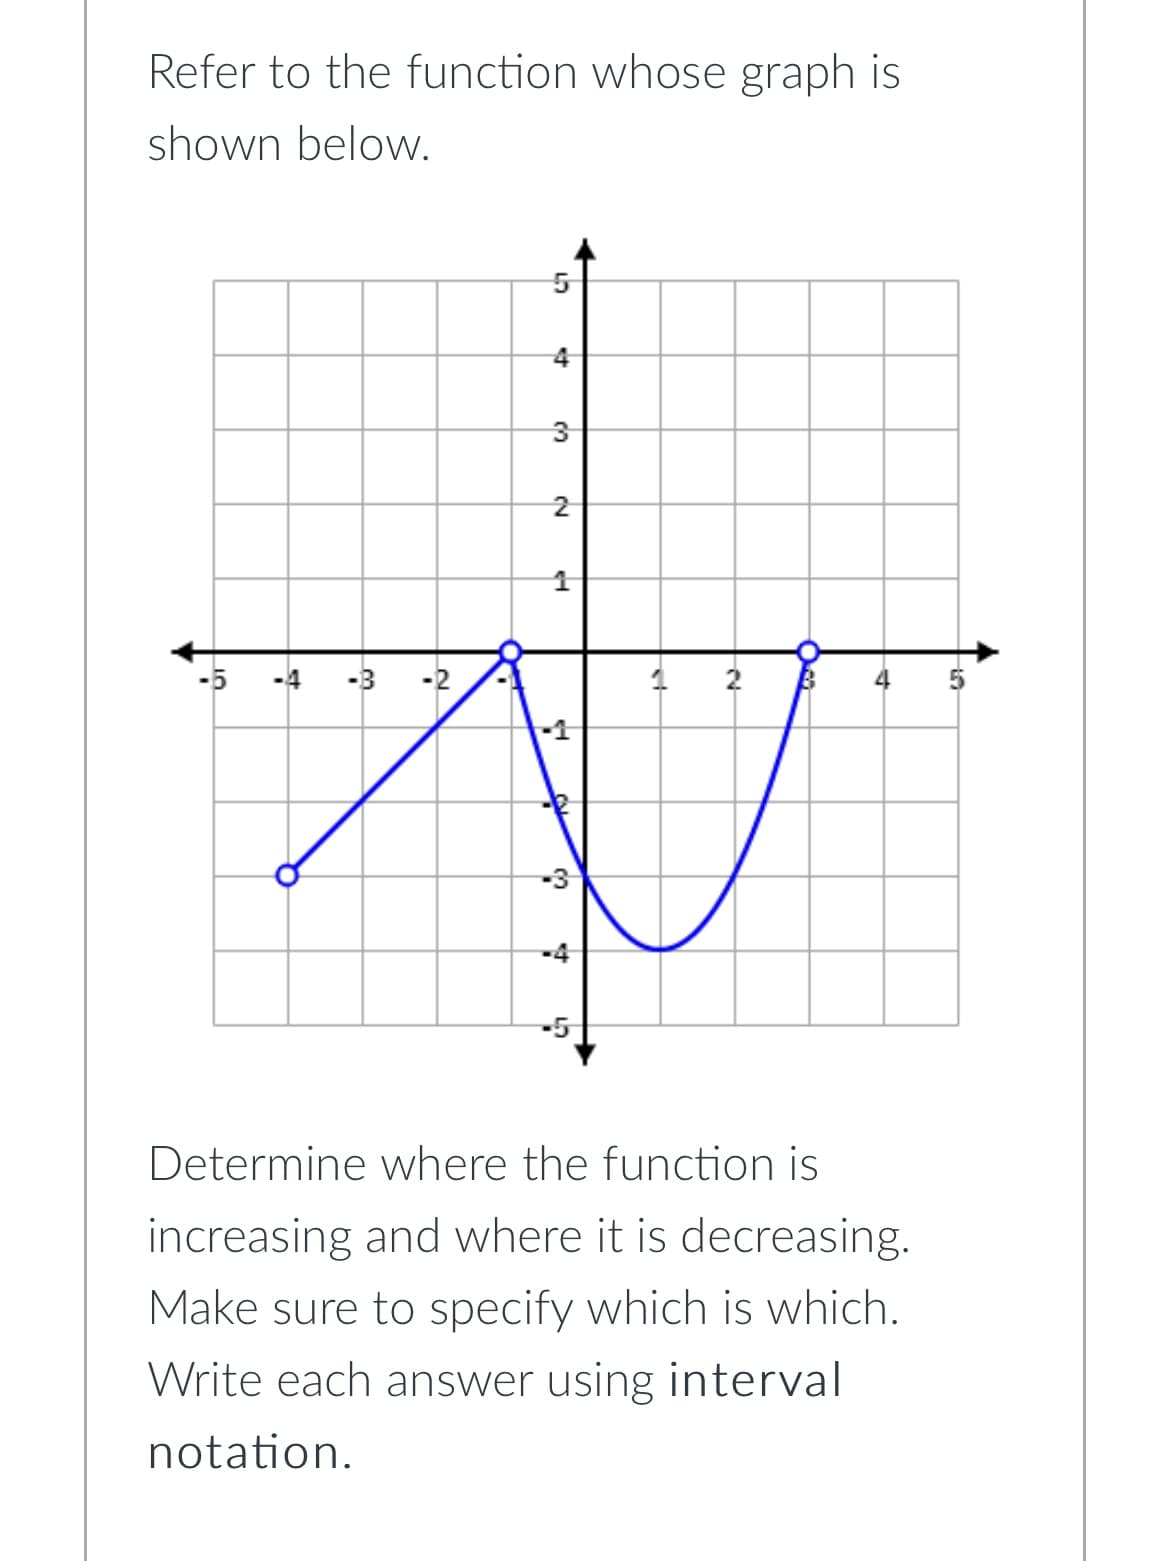 Refer to the function whose graph is
shown below.
10
w
-2
A
เว
4
3
2
B
-5
Determine where the function is
increasing and where it is decreasing.
Make sure to specify which is which.
Write each answer using interval
notation.
e4
4
دل
P
V